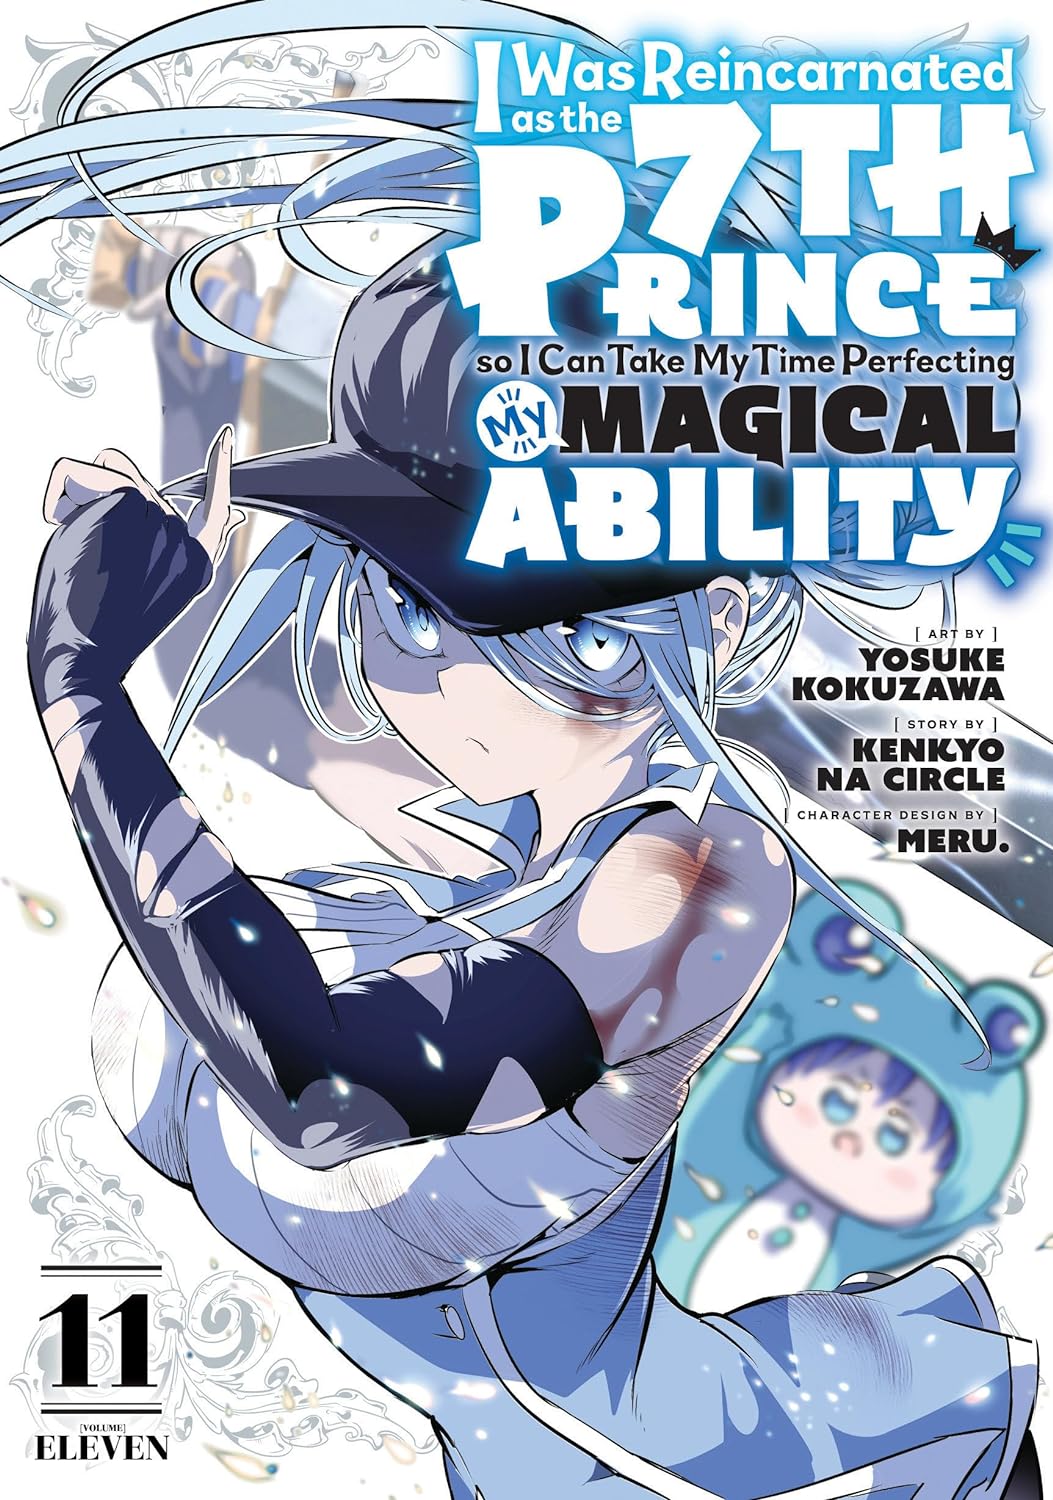 I Was Reincarnated as the 7th Prince so I Can Take My Time Perfecting My Magical Ability (Manga) Vol. 11